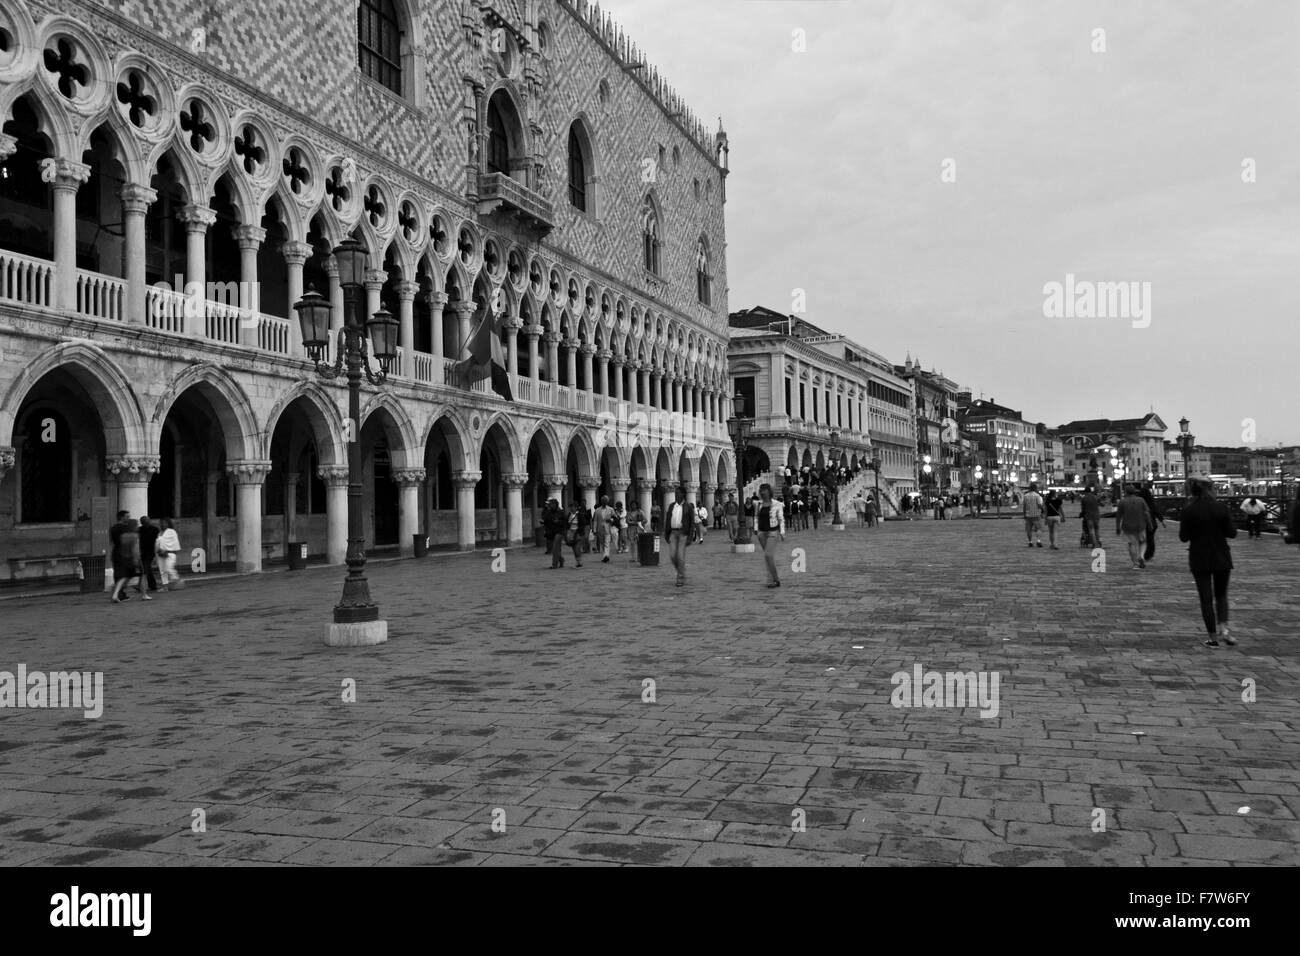 Venice, Italy, Jun4 4 2014: Doge's Palace, in the famous central St.Mark square, Architectural detail Stock Photo